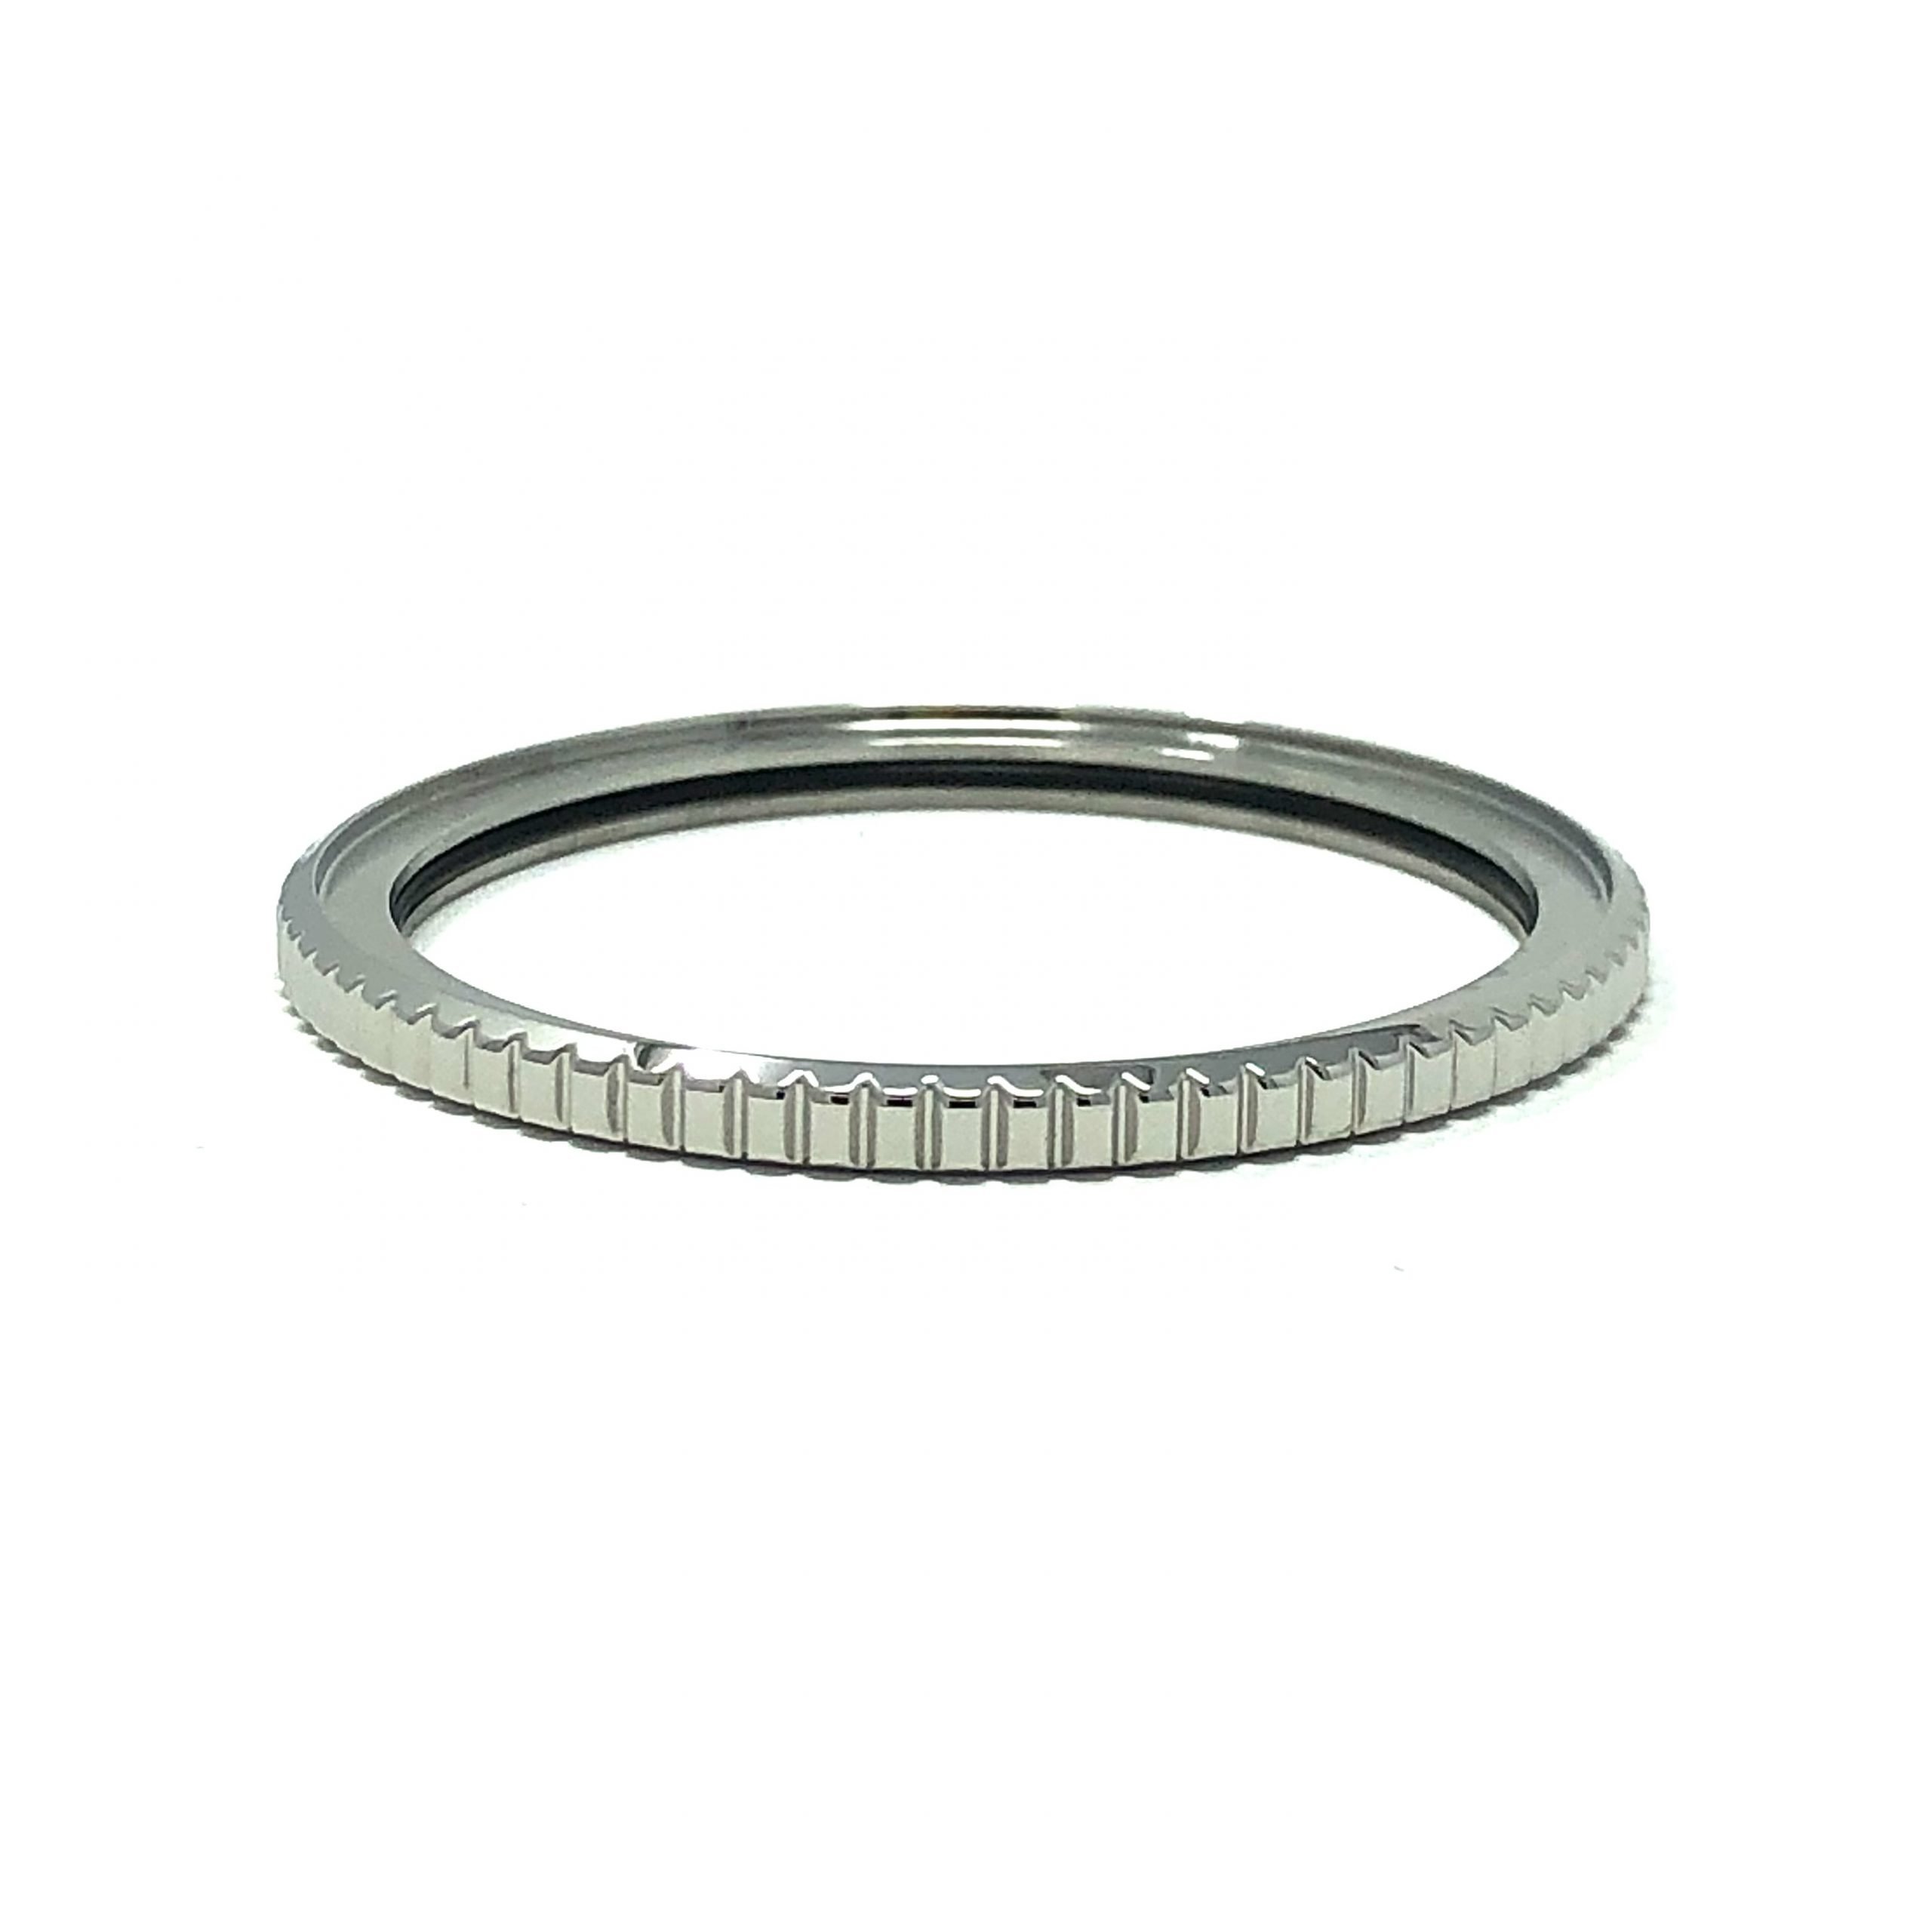 SNZF17 SEA URCHIN 3M ADHESIVE BEZEL INSERT RINGS FOR SEIKO SNZF15 5 